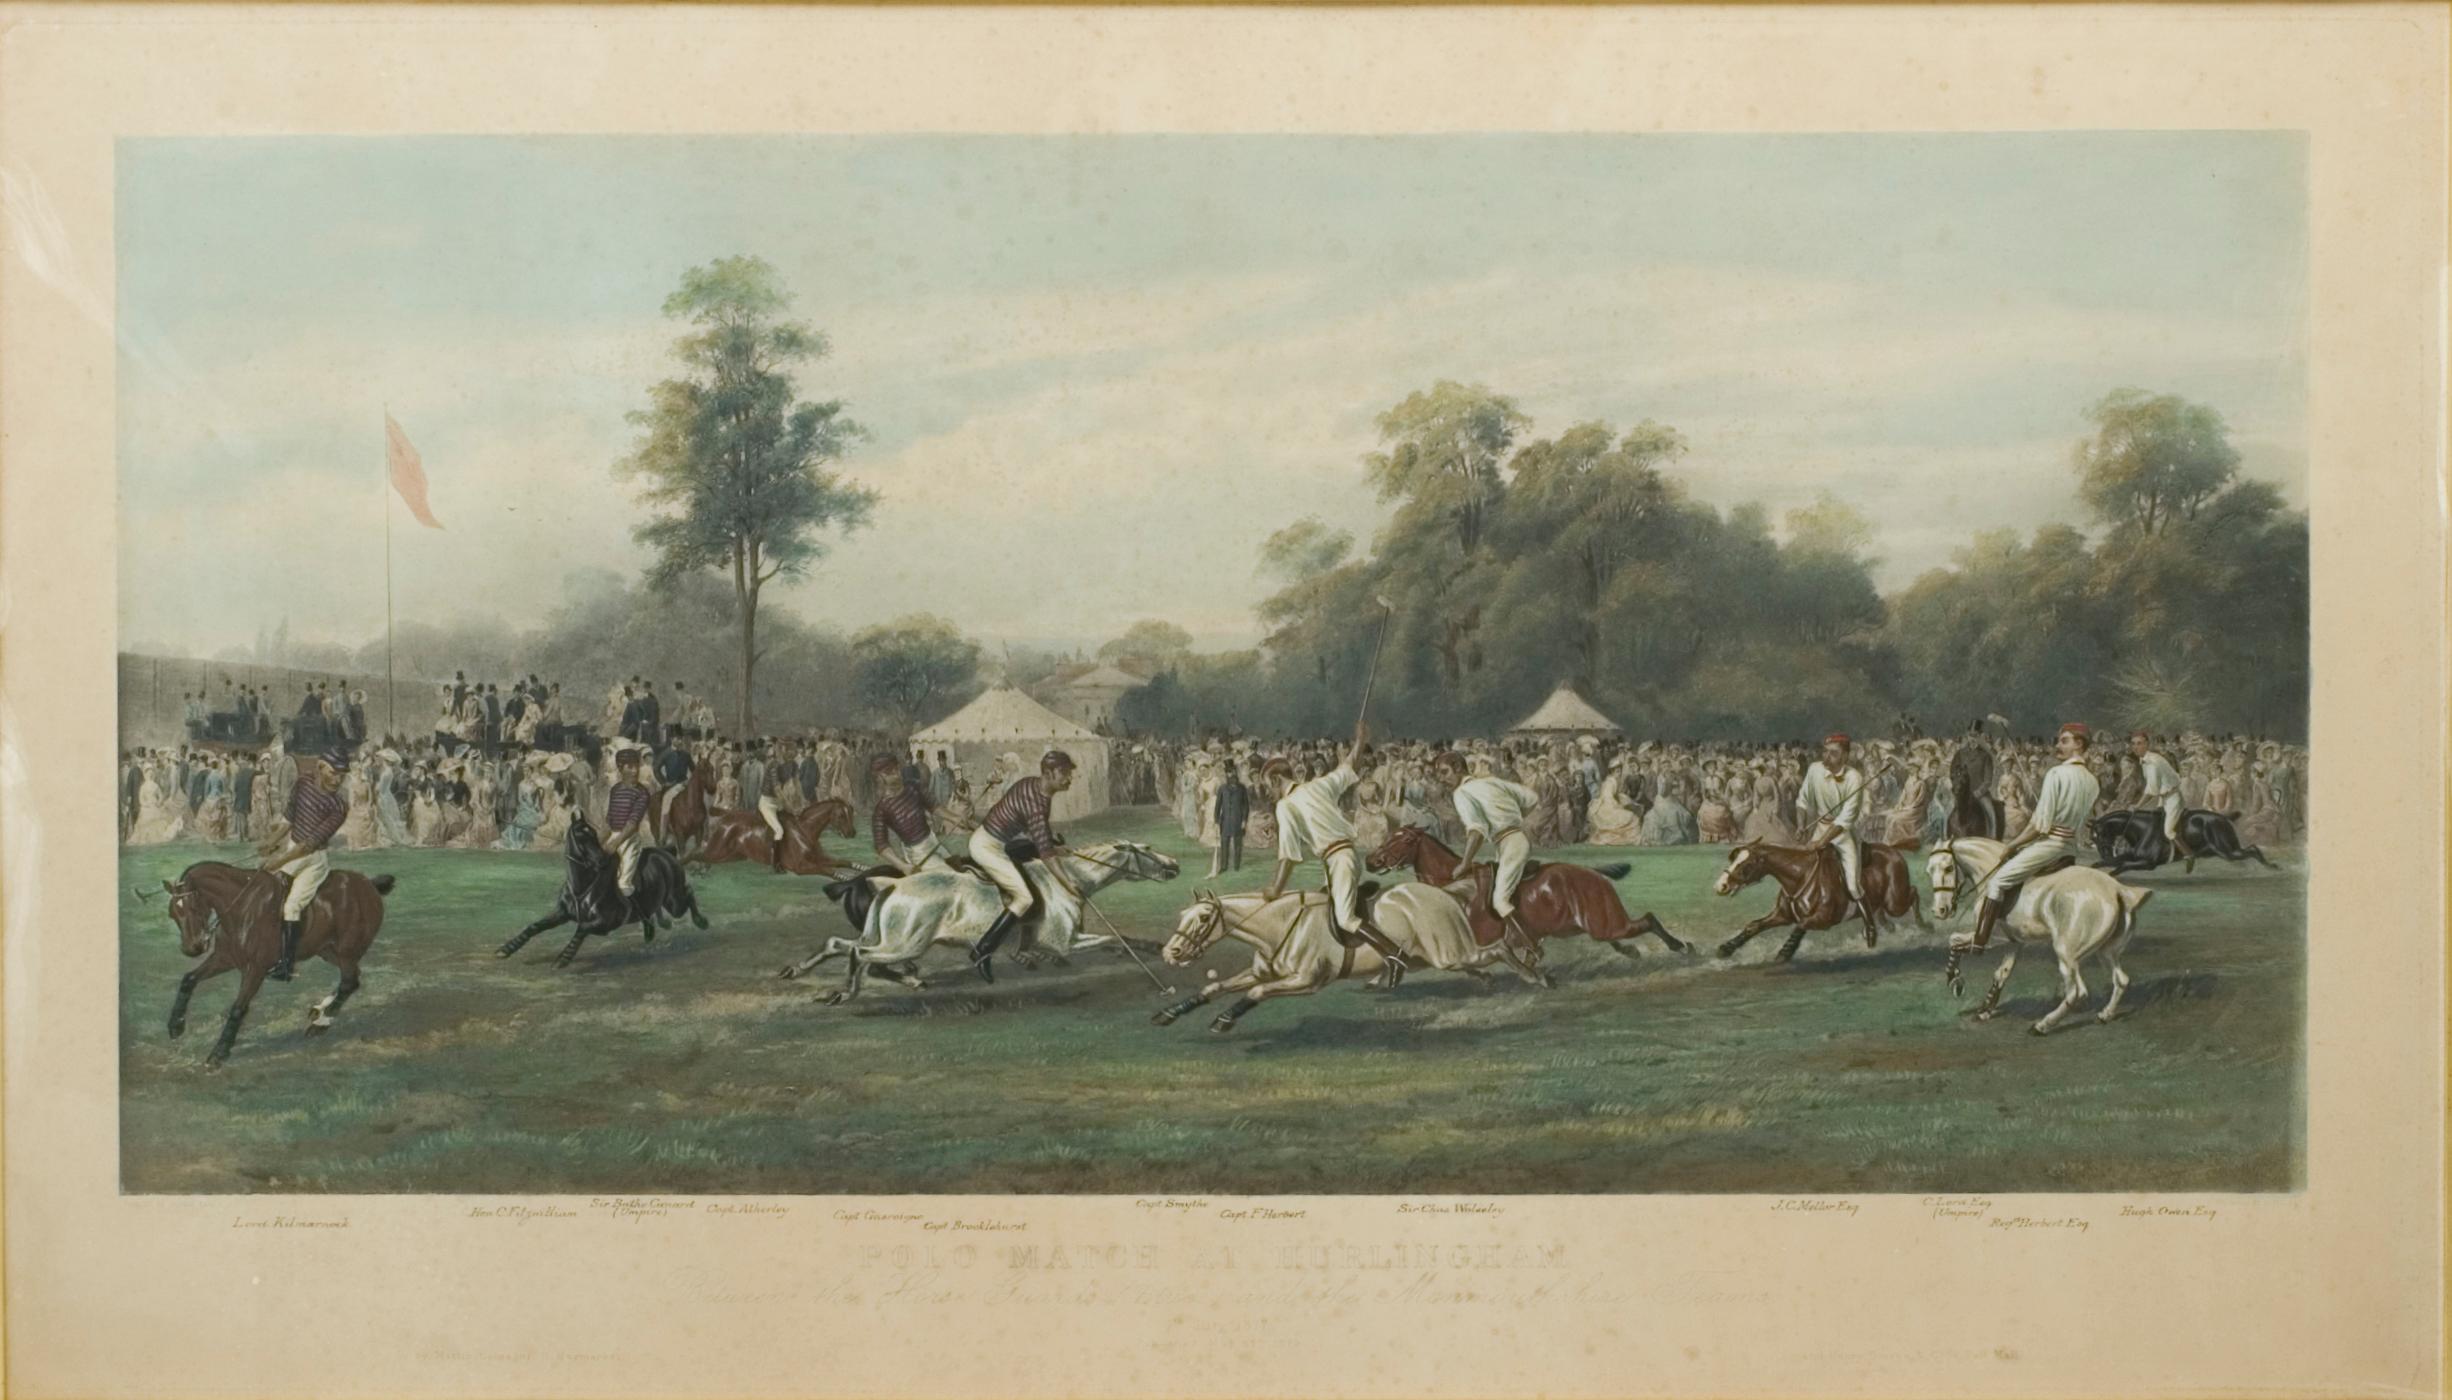 Hurlingham Polo Picture, 1877 Polo Match Between the Horse Guards and the Monmouthshire Teams.
A vintage hand-colored photogravure after the original painting by George Earl, A Polo Match At Hurlingham. The full title for this print is 